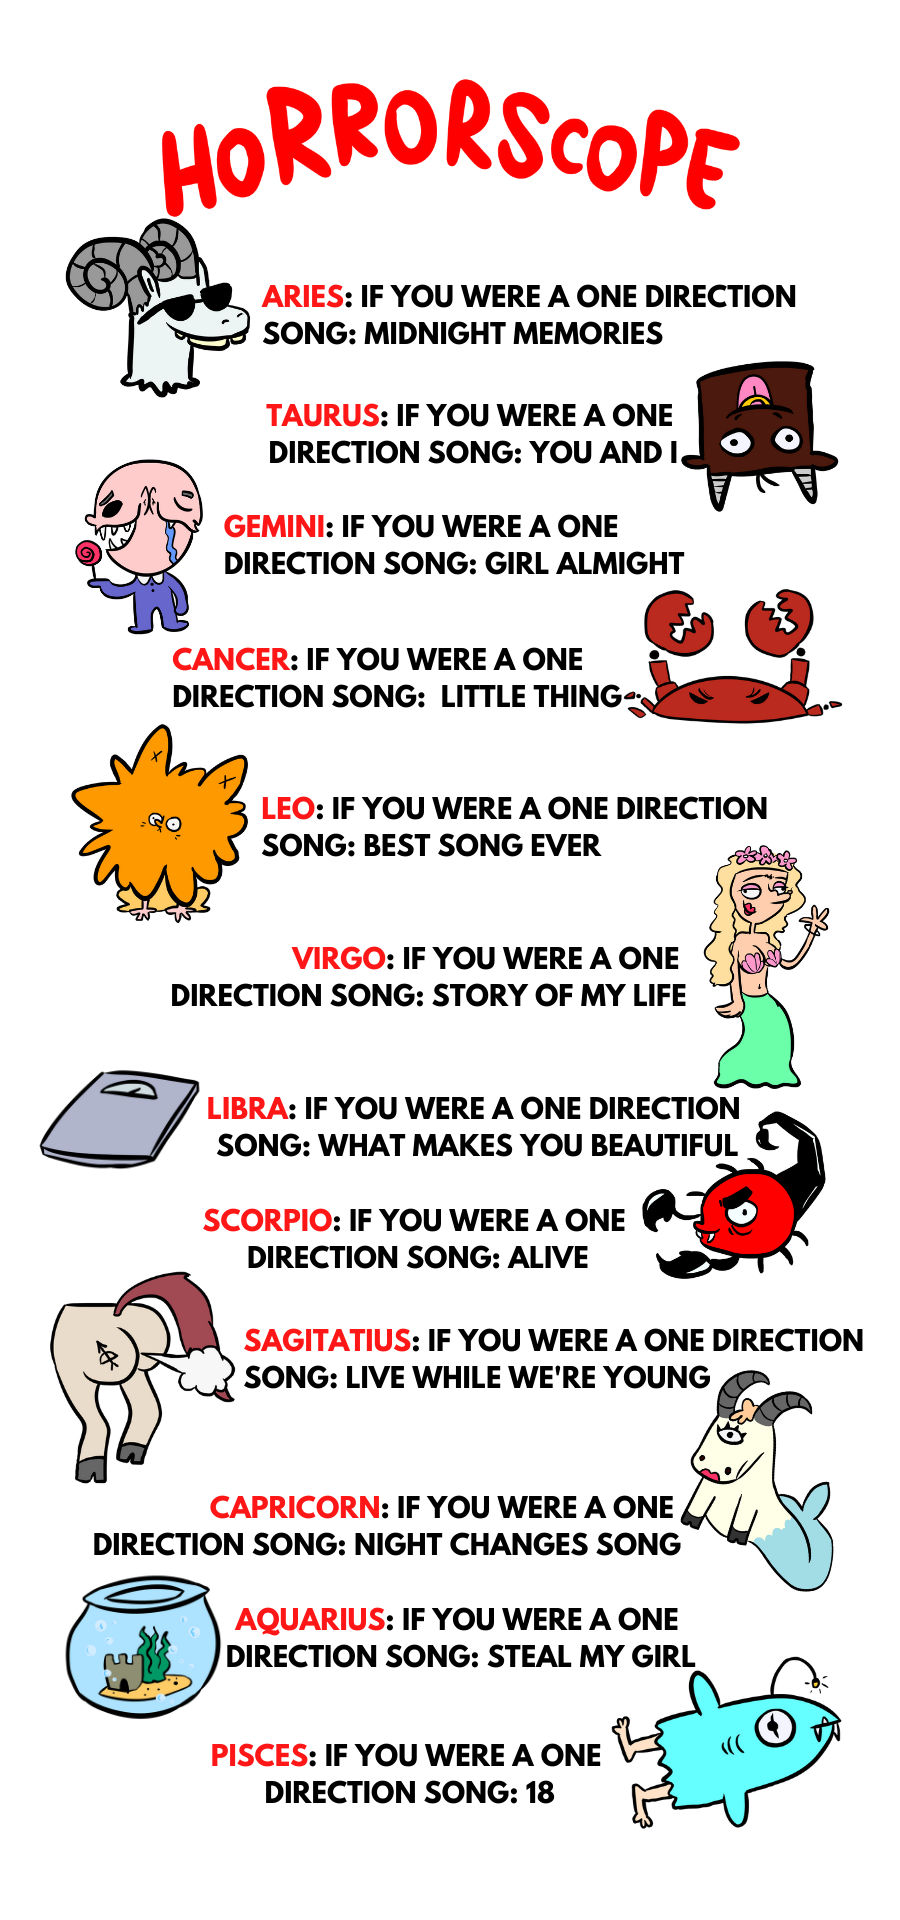 Horrorscope  ARIES: If you were a One Direction song: Midnight Memories TAURUS: If you were a One Direction song: You and I GEMINI: If you were a One Direction song: Girl Almighty CANCER: If you were a One Direction song: Little things LEO: If you were a One Direction song: Best Song Ever VIRGO: If you were a One Direction song: Story of My Life LIBRA: If you were a One Direction song: What Makes You Beautiful SCORPIO: If you were a One Direction song: Alive SAGITTARIUS: If you were a One Direction song: Live While We're Young CAPRICORN: If you were a One Direction: Night Changes song AQUARIUS: If you were a One Direction song: Steal My Girl PISCES: If you were a One Direction song: 18